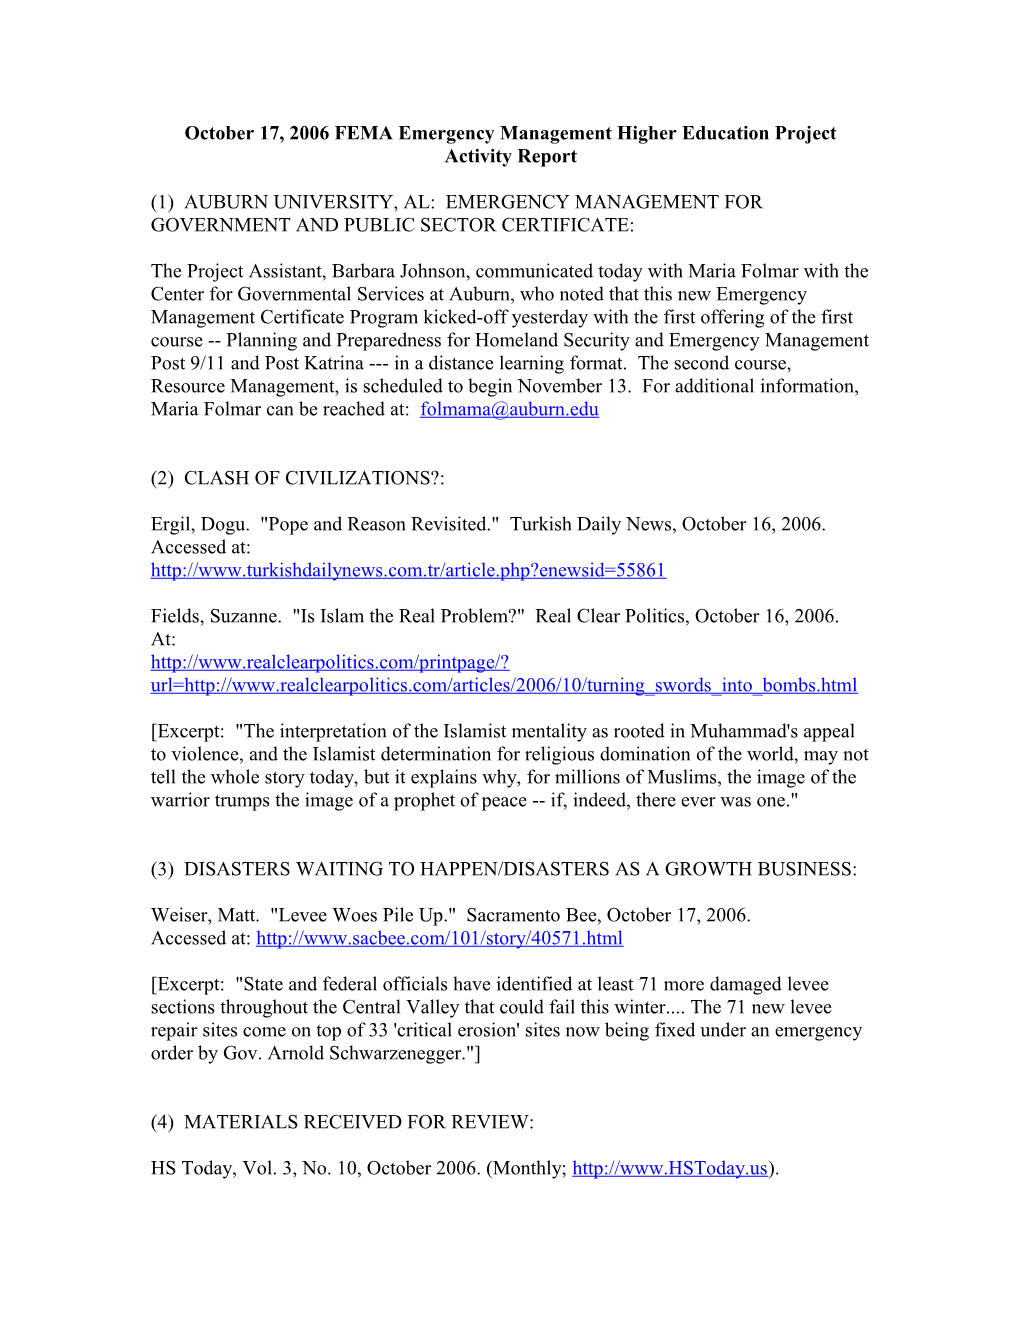 October 17, 2006 FEMA Emergency Management Higher Education Project Activity Report